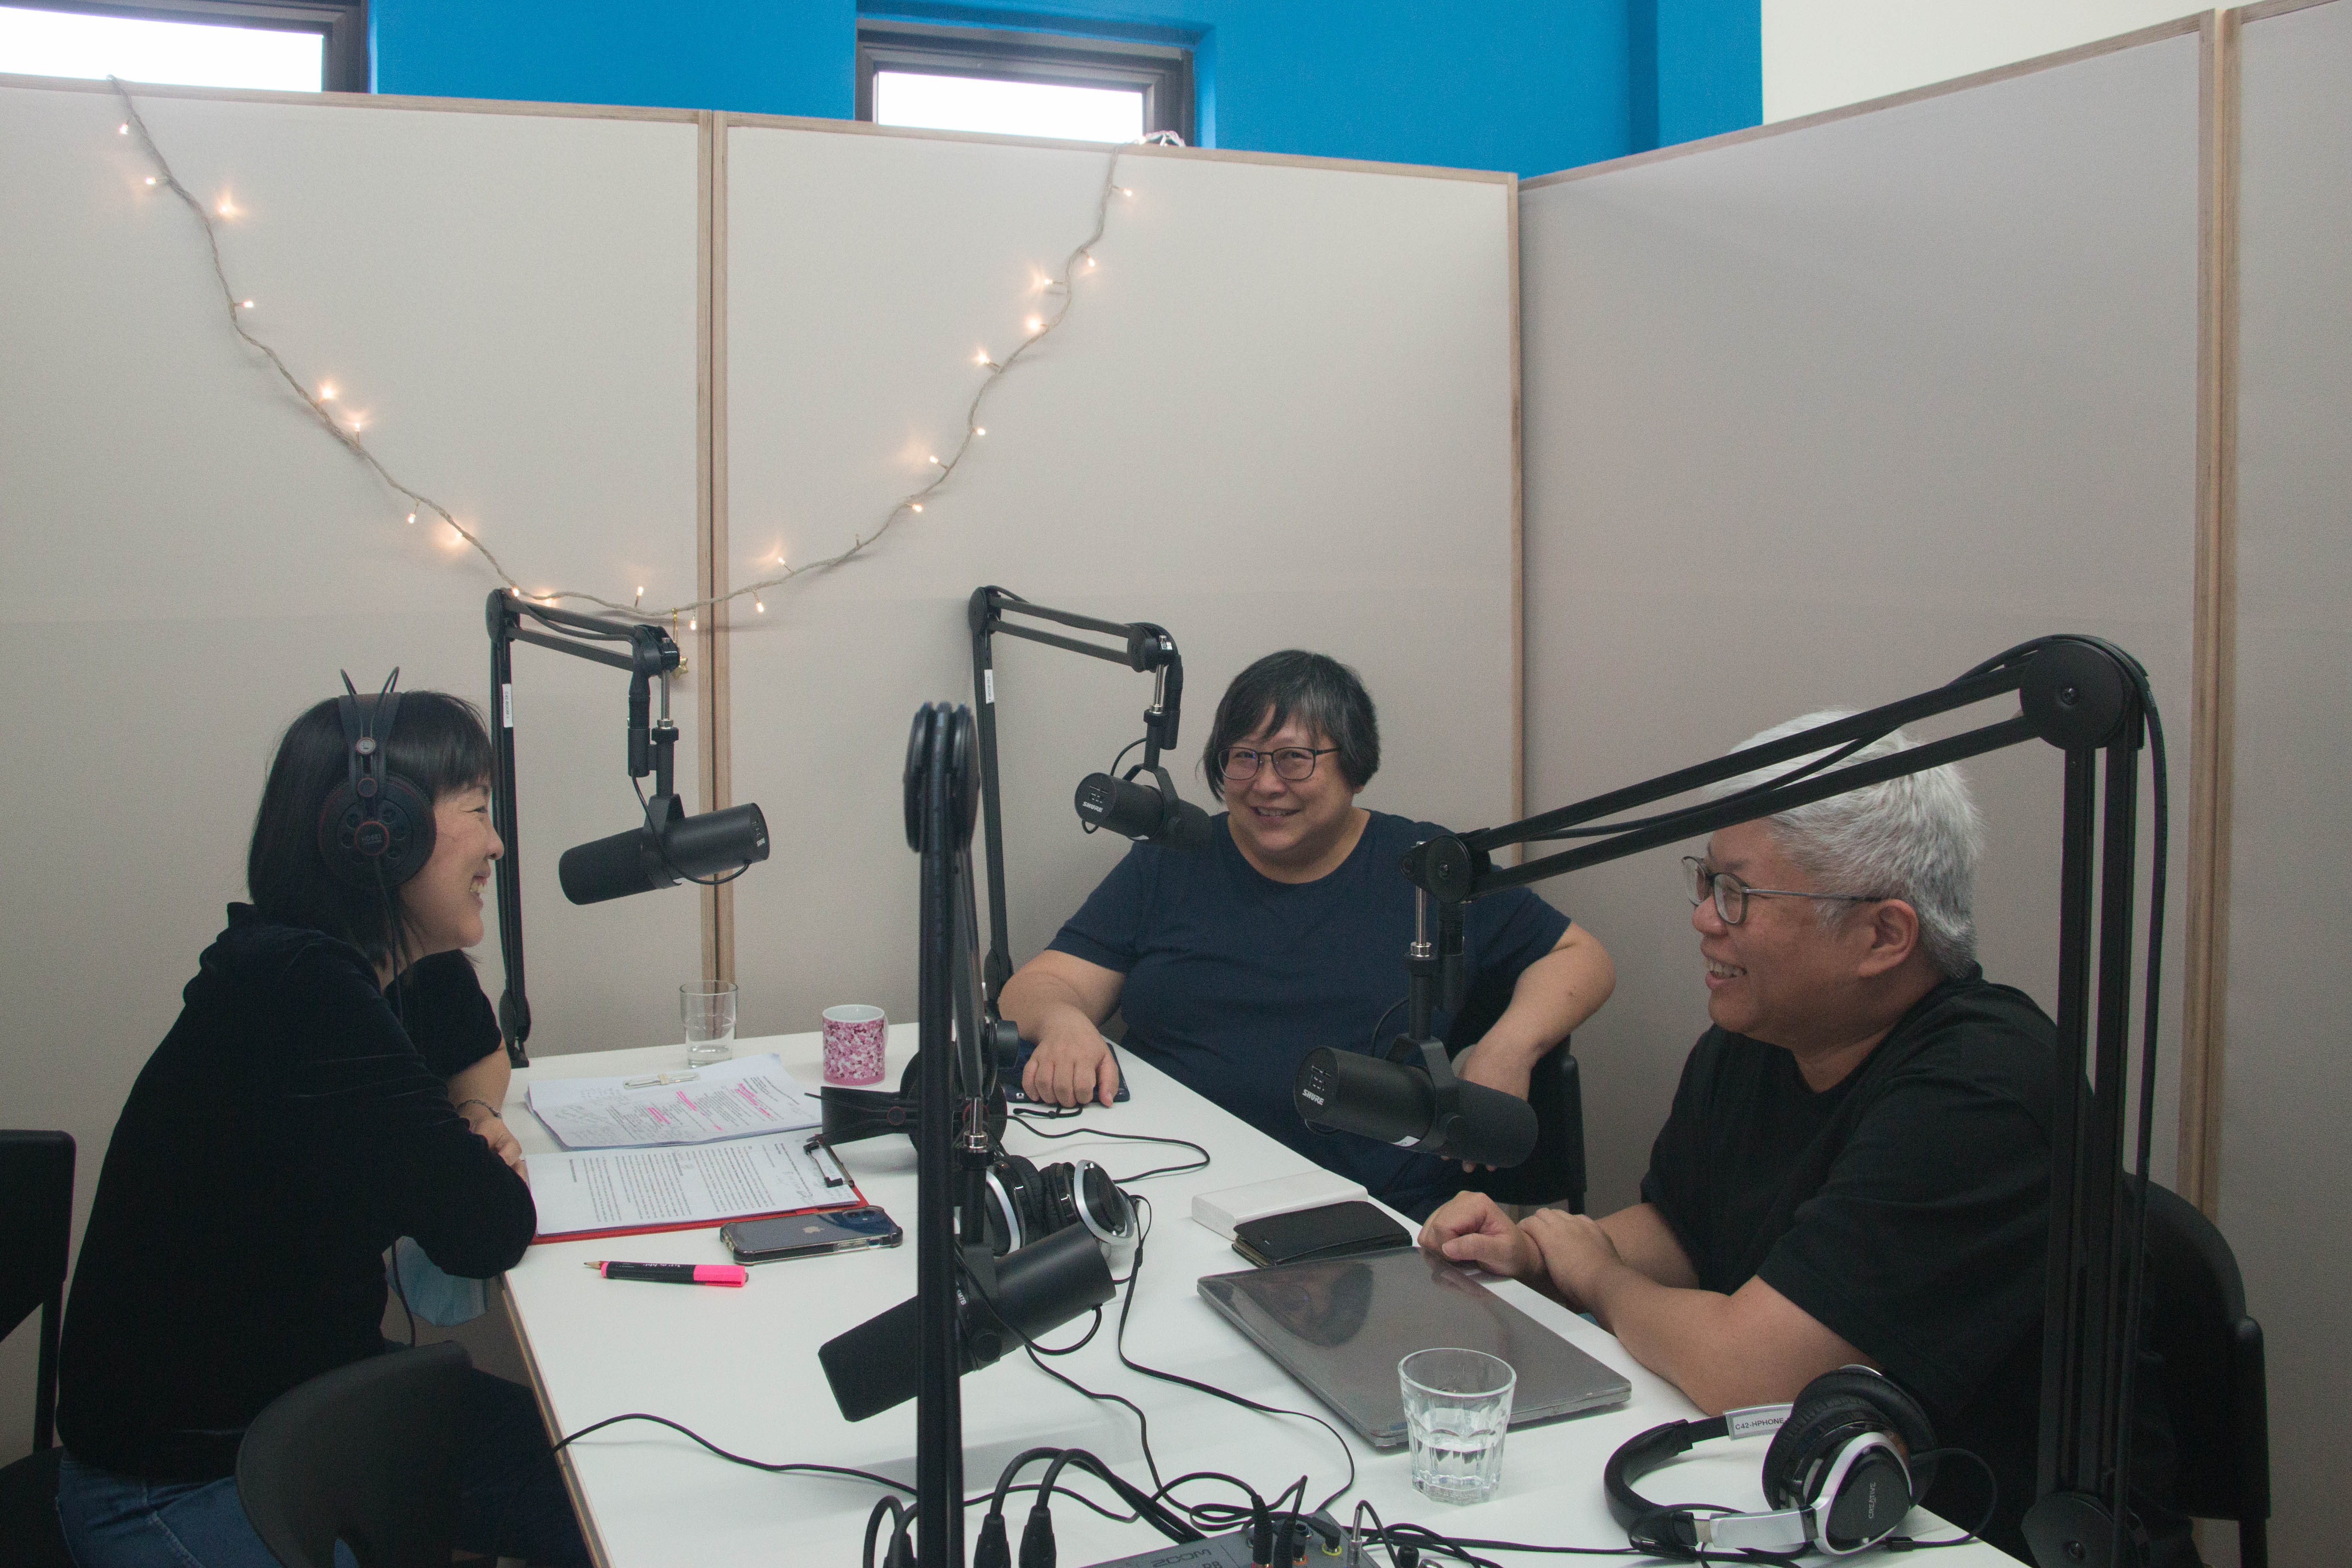 The photograph features a group of people in a conversation while seated around a table with microphones facing them, smiling as they wear headphones.